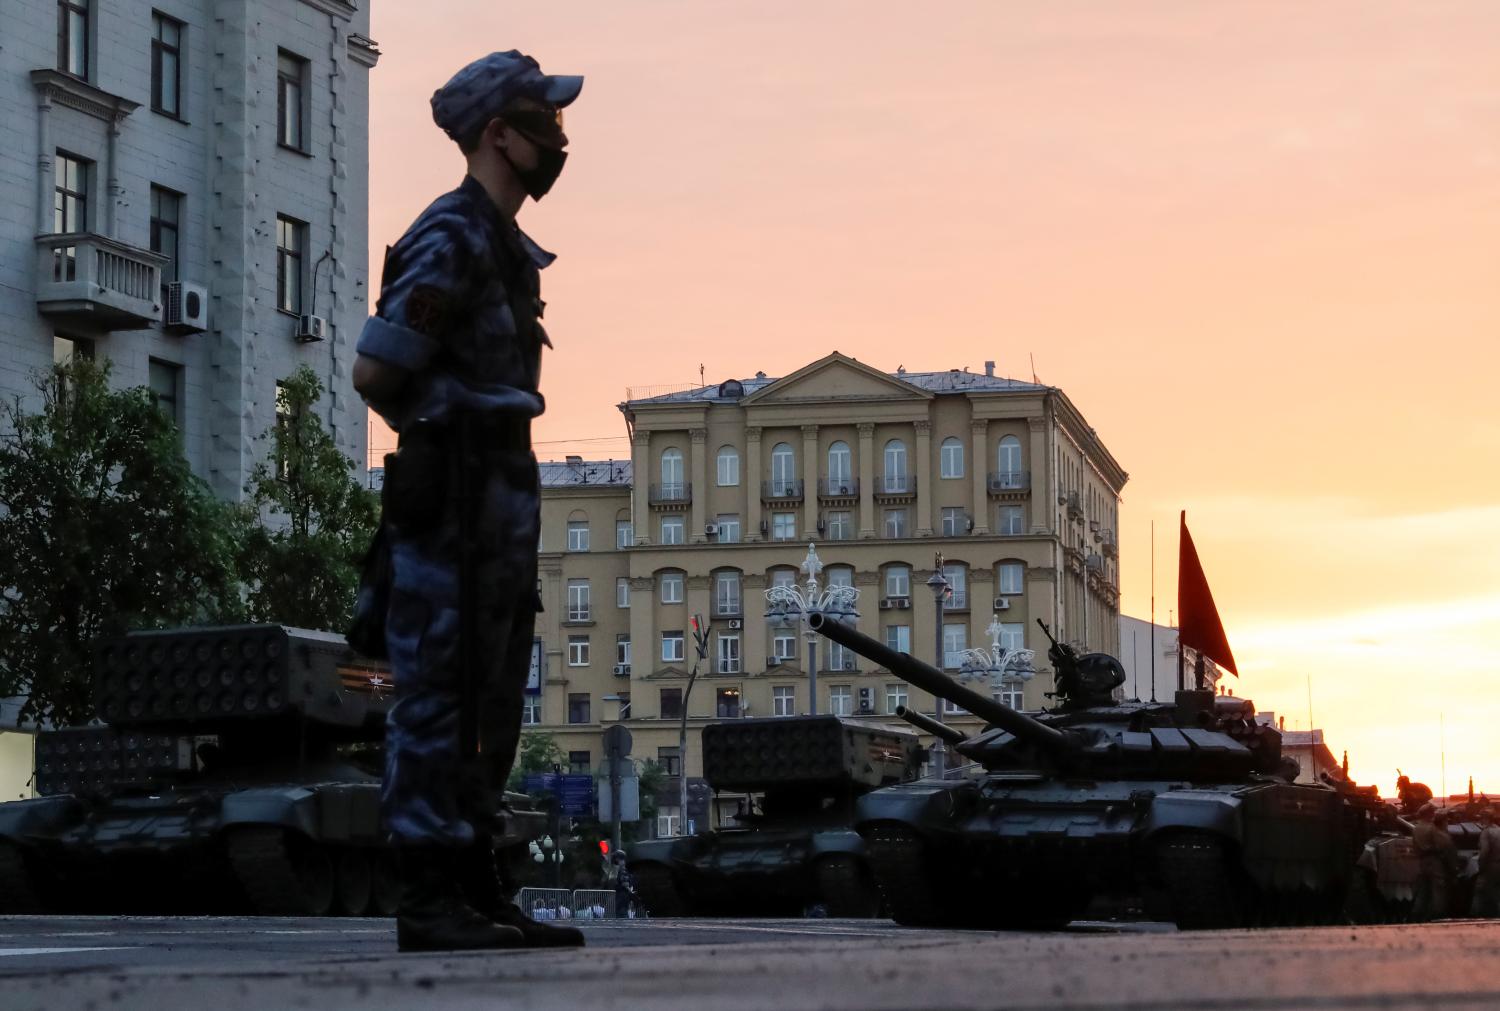 A National Guard secures Tverskaya Street as army servicemen get ready their military vehicle before a rehearsal for the Victory Day parade in Moscow, Russia, June 18, 2020. The military parade marking the 75th anniversary of the victory over Nazi Germany in World War Two was planned for May 9 and postponed due to the outbreak of the coronavirus disease (COVID-19).   REUTERS/Shamil Zhumatov